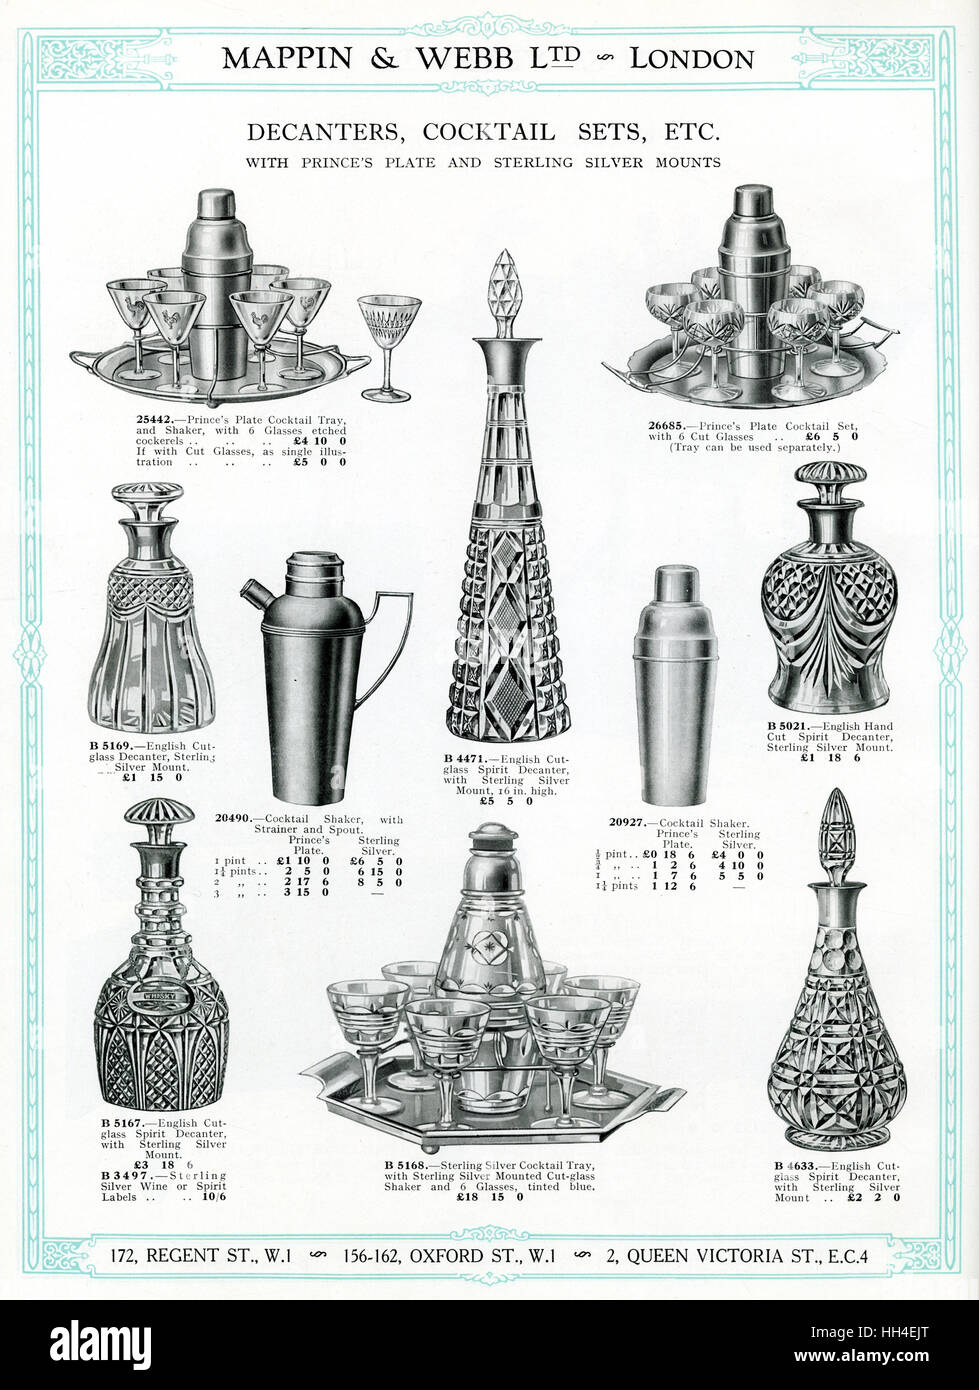 Trade Catalogue for decanters, cocktail sets 1930 Stock Photo